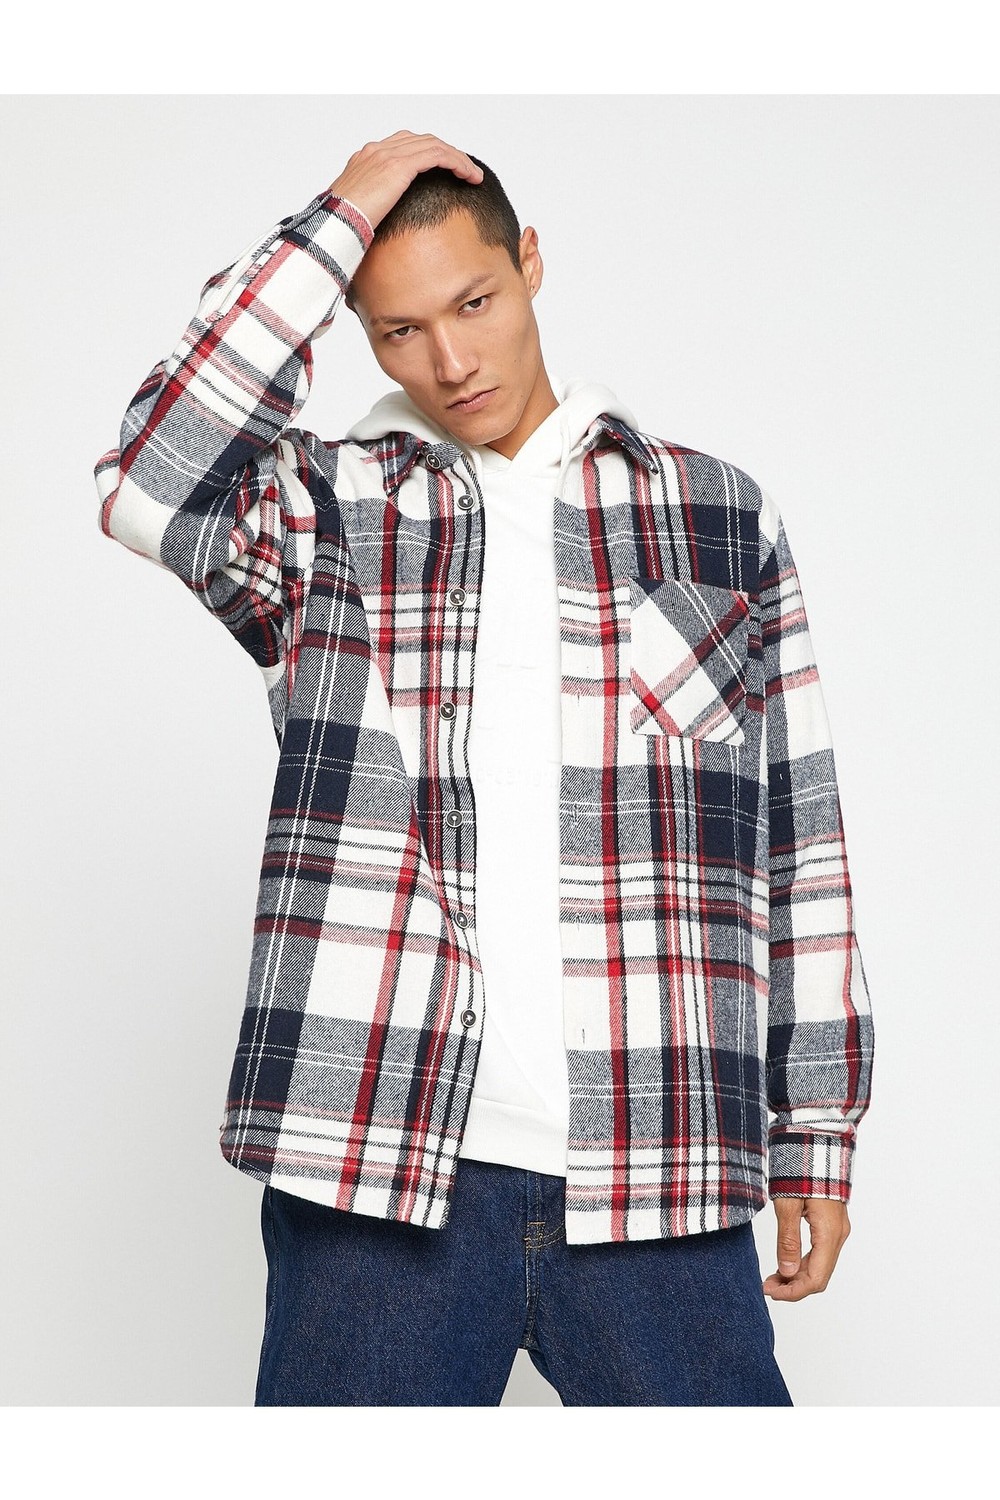 Koton Checked Lumberjack Shirt with a Classic Collar, Pocket Detailed, Long Sleeves.